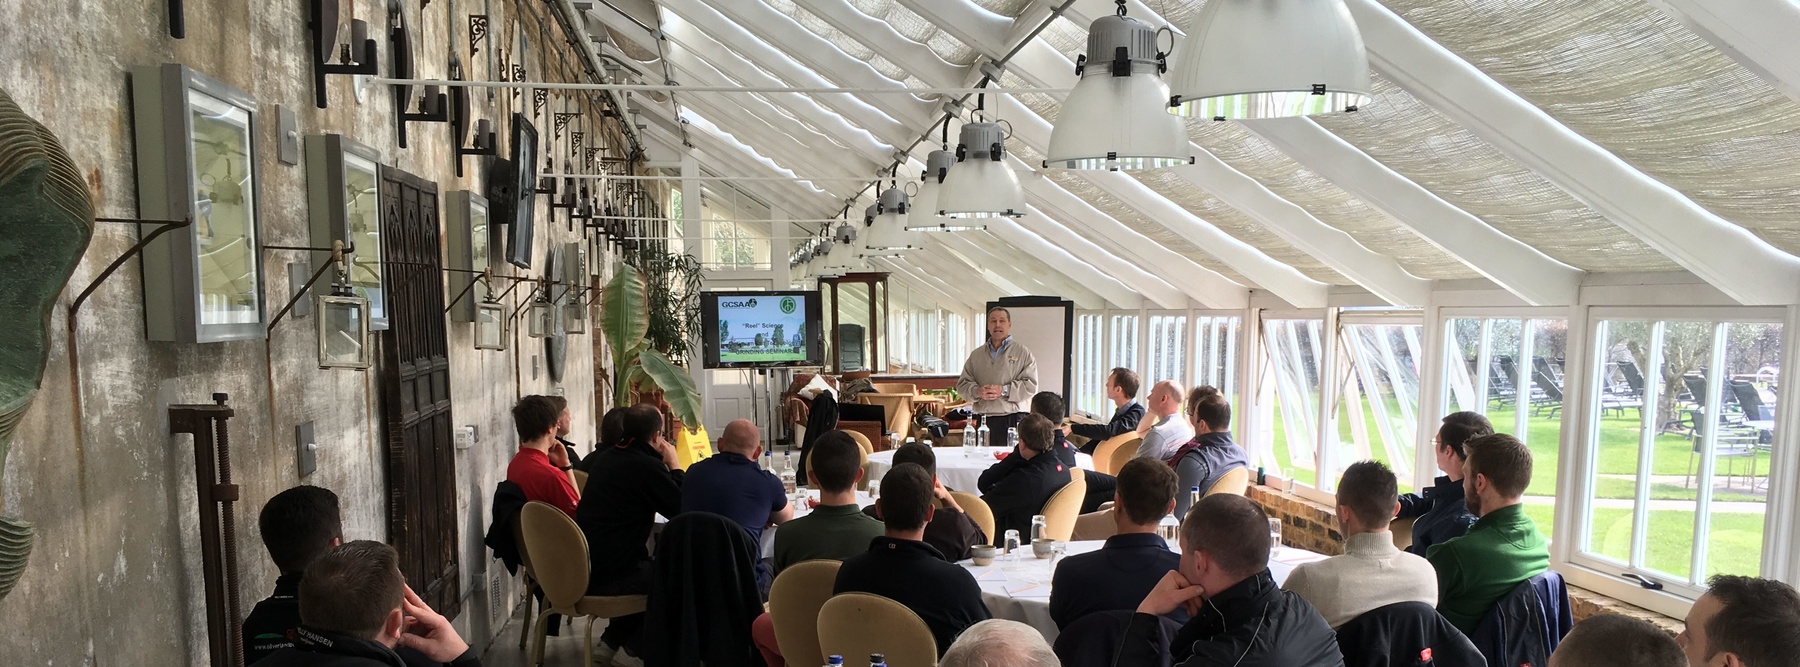 Foley Seminar on Reel Technology at The Grove GC